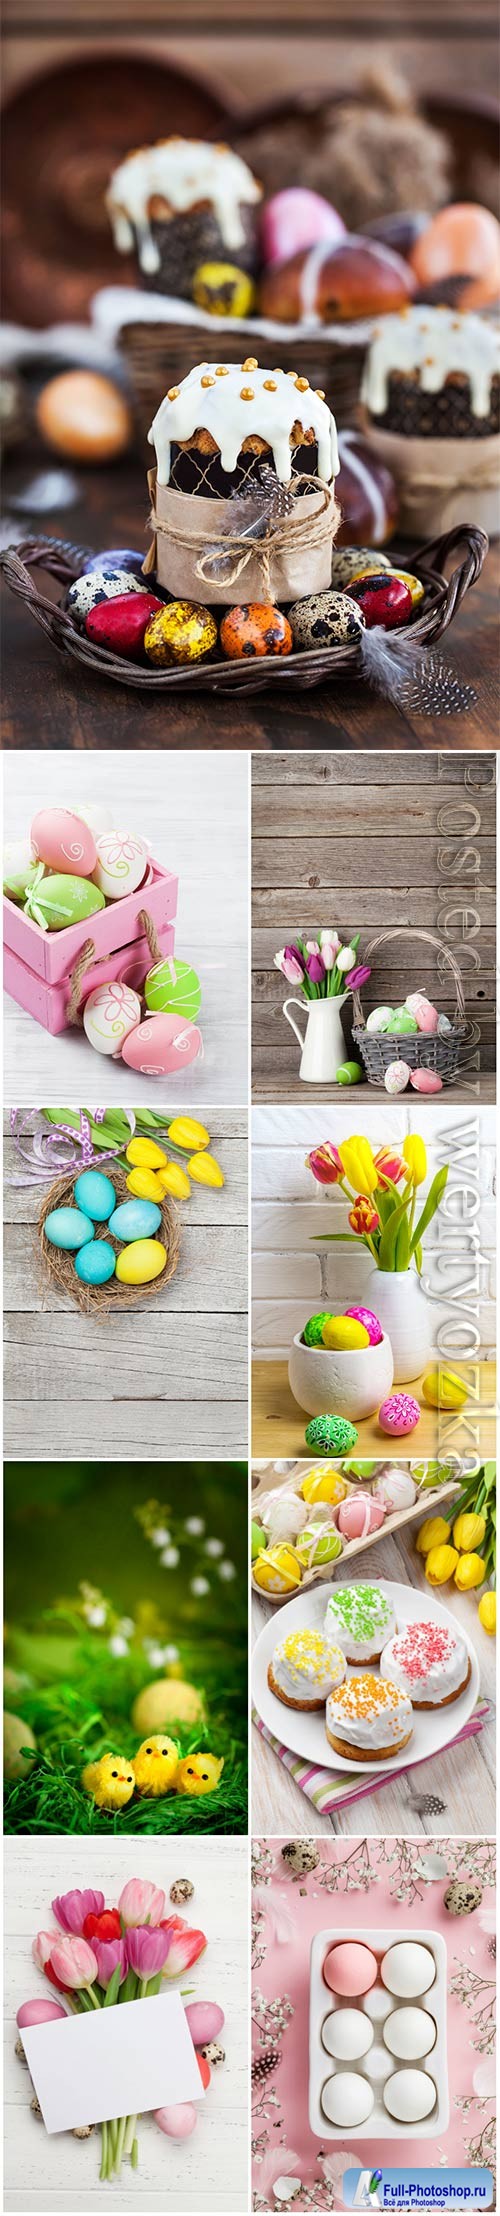 Happy Easter stock photo, Easter eggs, spring flowers # 11